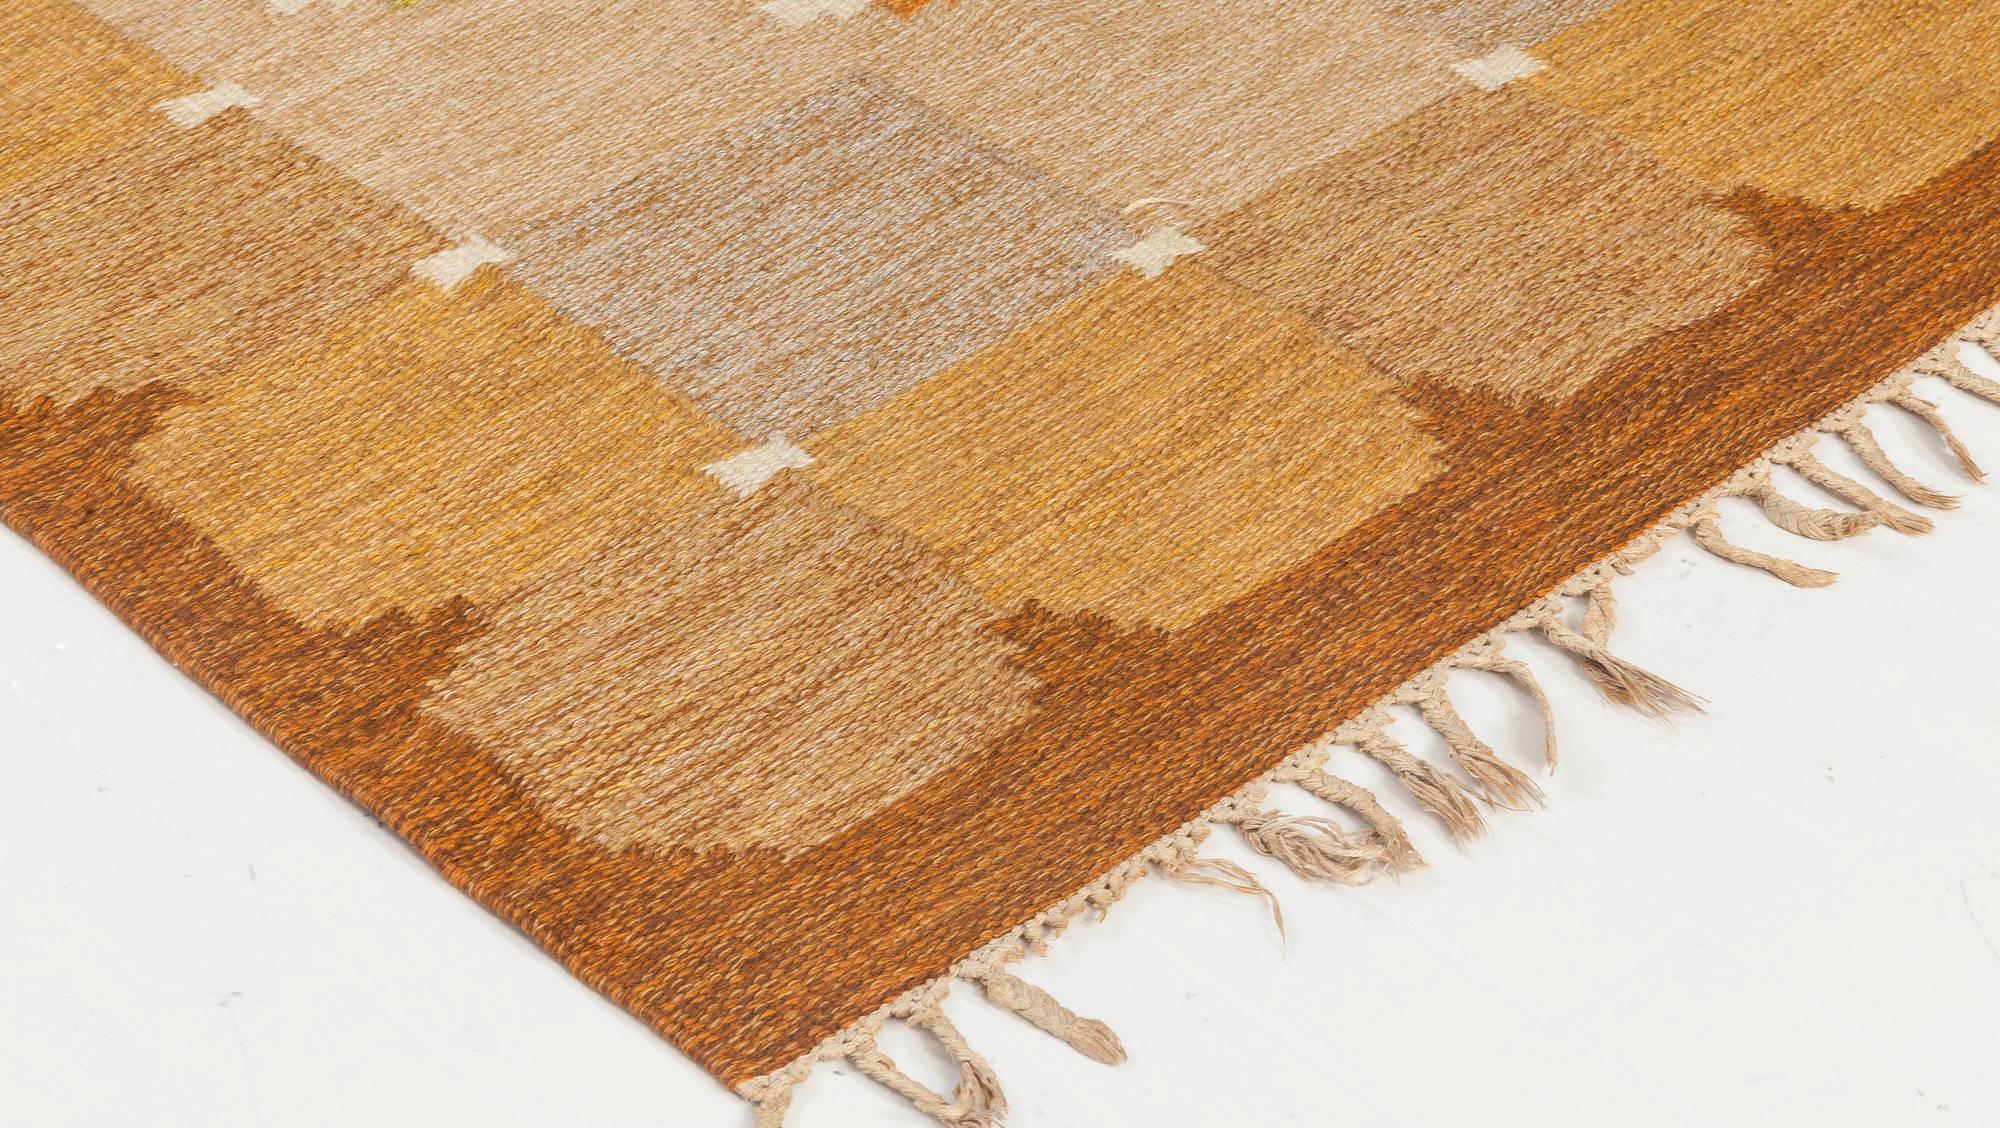 Hand-Woven Mid-20th Century Swedish Flat-Weave Wool Rug by Ingegerd Silow For Sale